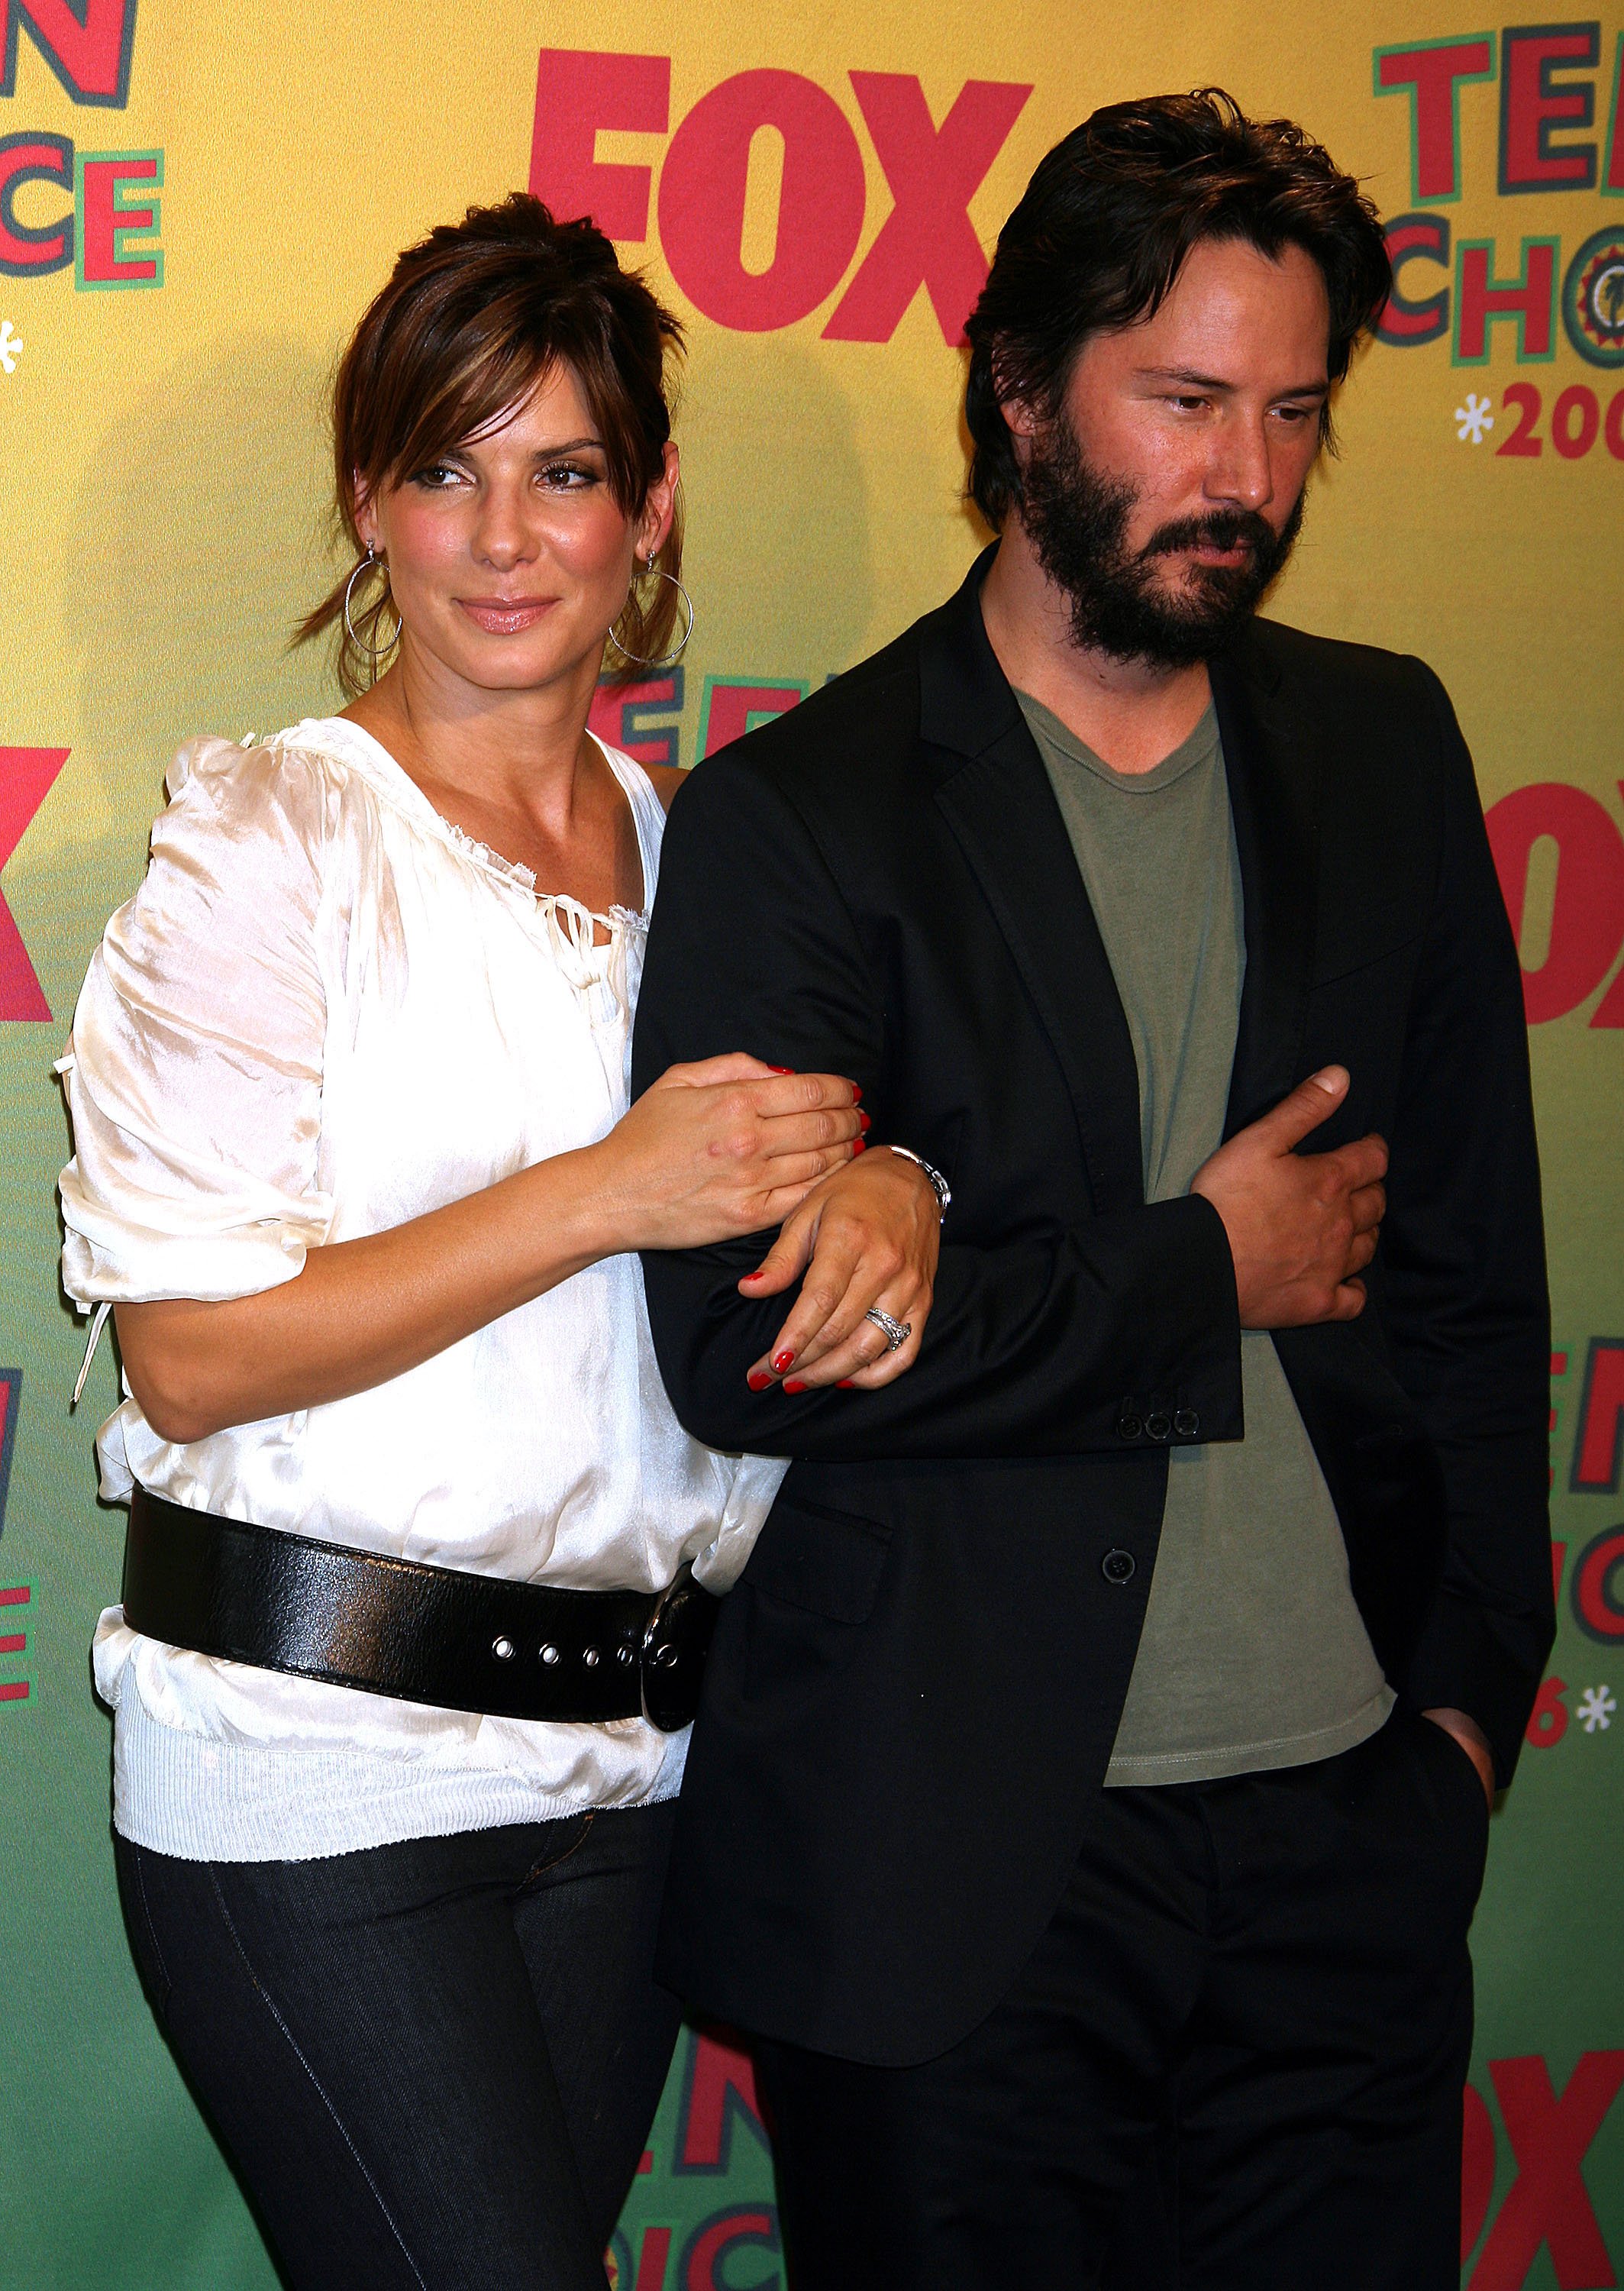 Sandra Bullock and Keanu Reeves during 2006 Teen Choice Awards - Press Room at Gibson Amphitheatre in Universal City, California | Source: Getty Images